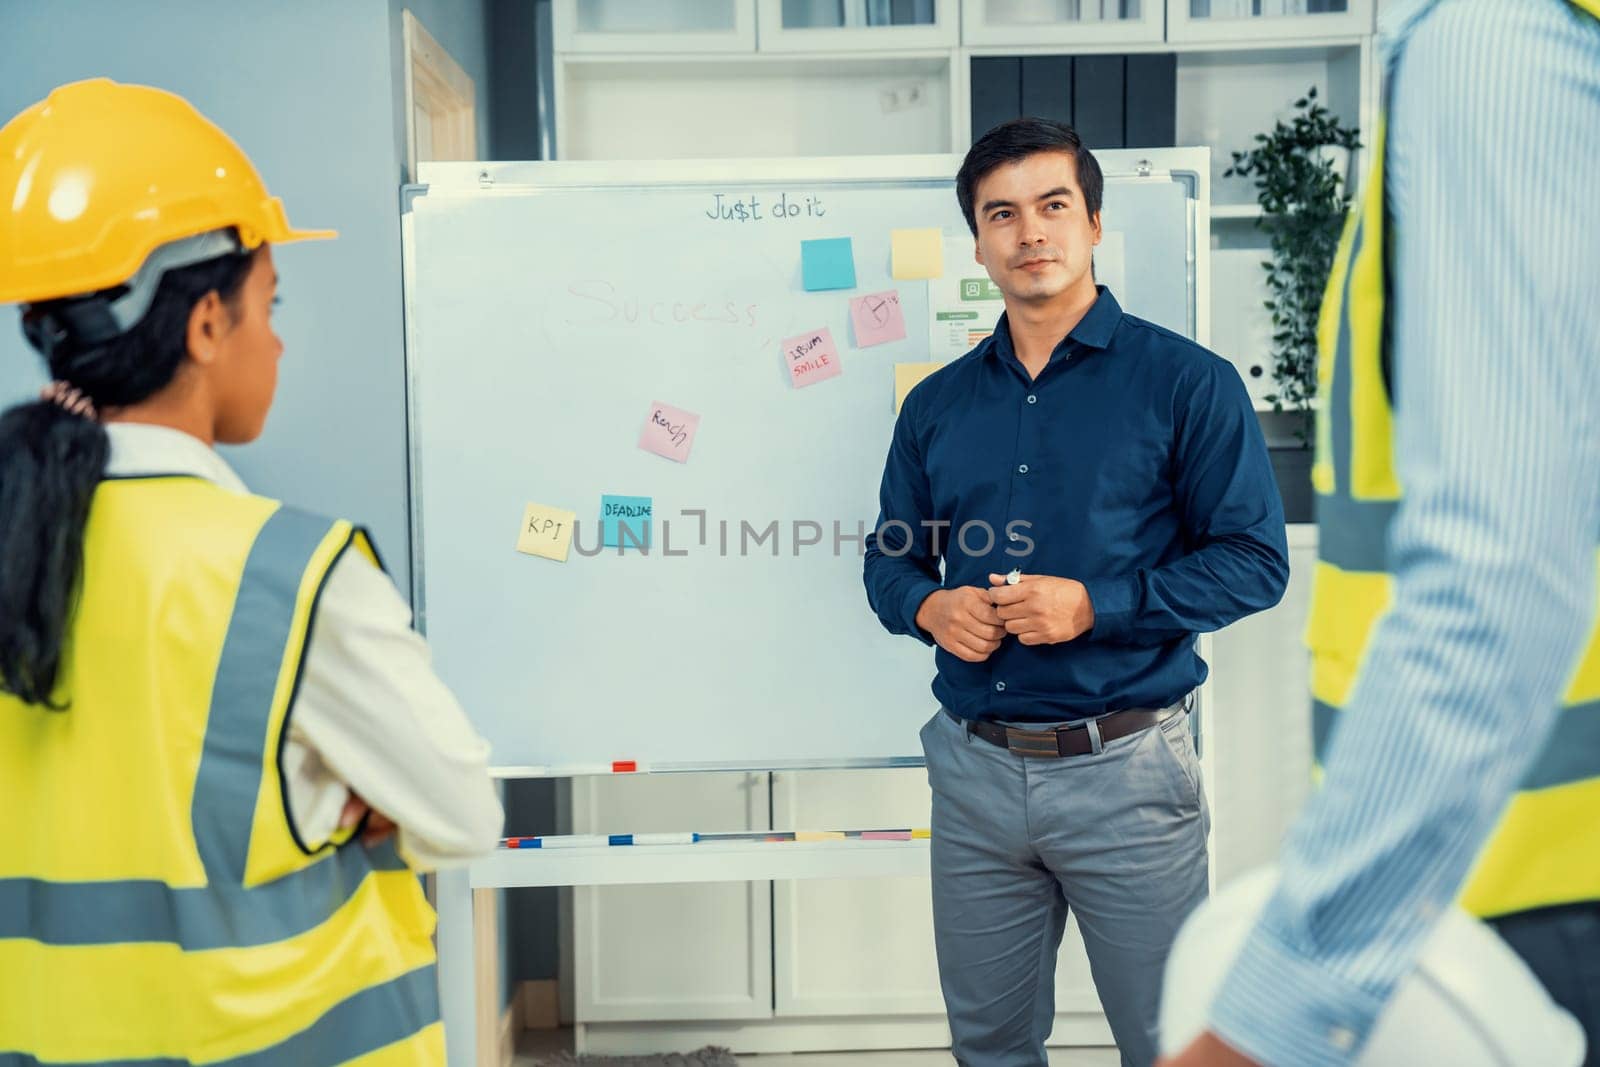 A team of investor and competent engineers brainstorming on the whiteboard to find new ideas and making plans. The idea of a team gather ideas together.